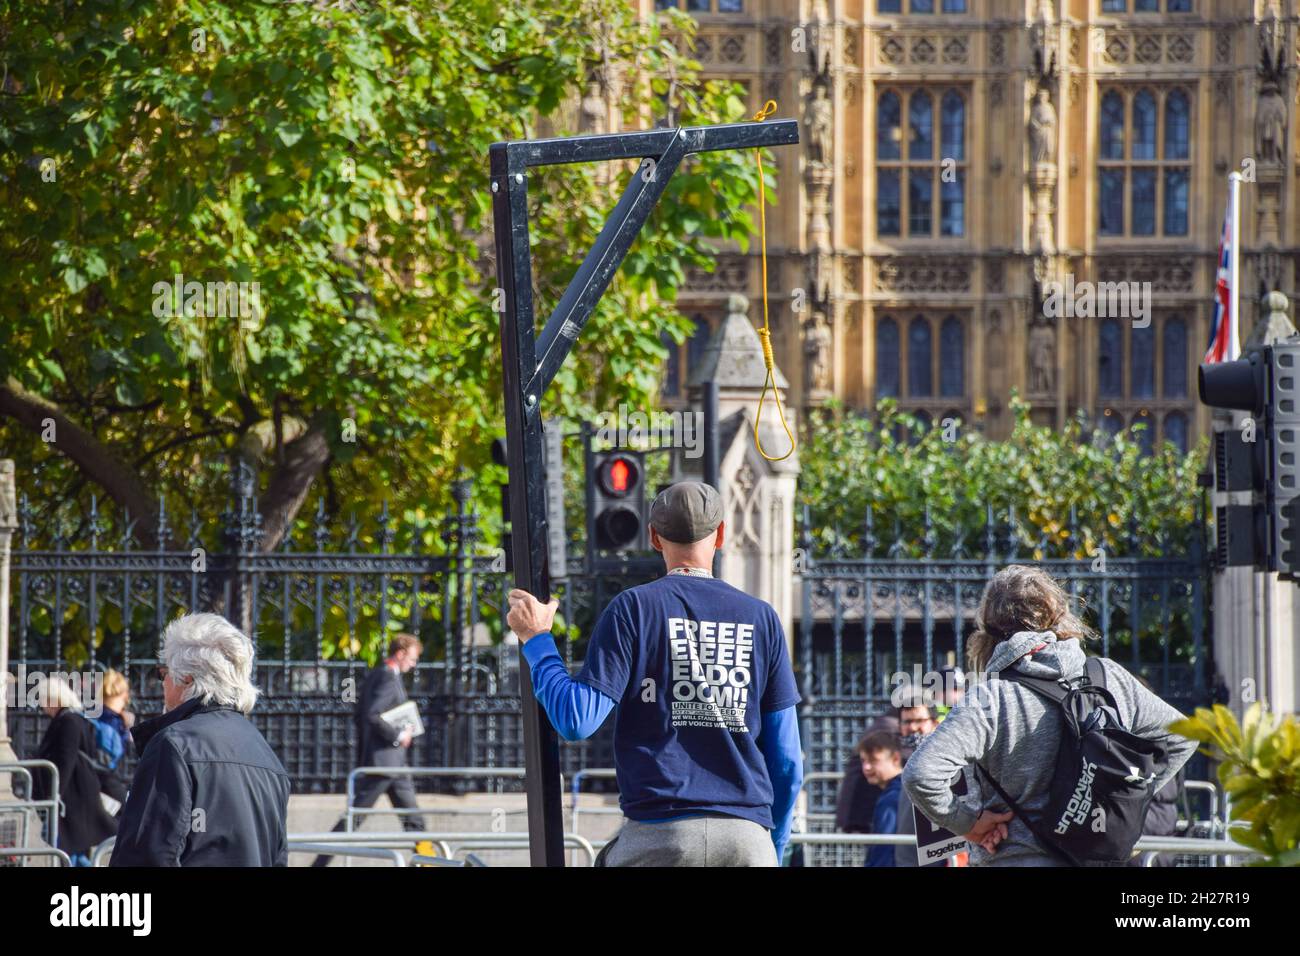 London, UK. 20th October 2021. Anti-vax protesters erected gallows and a noose outside the Houses of Parliament. Credit: Vuk Valcic / Alamy Live News Stock Photo